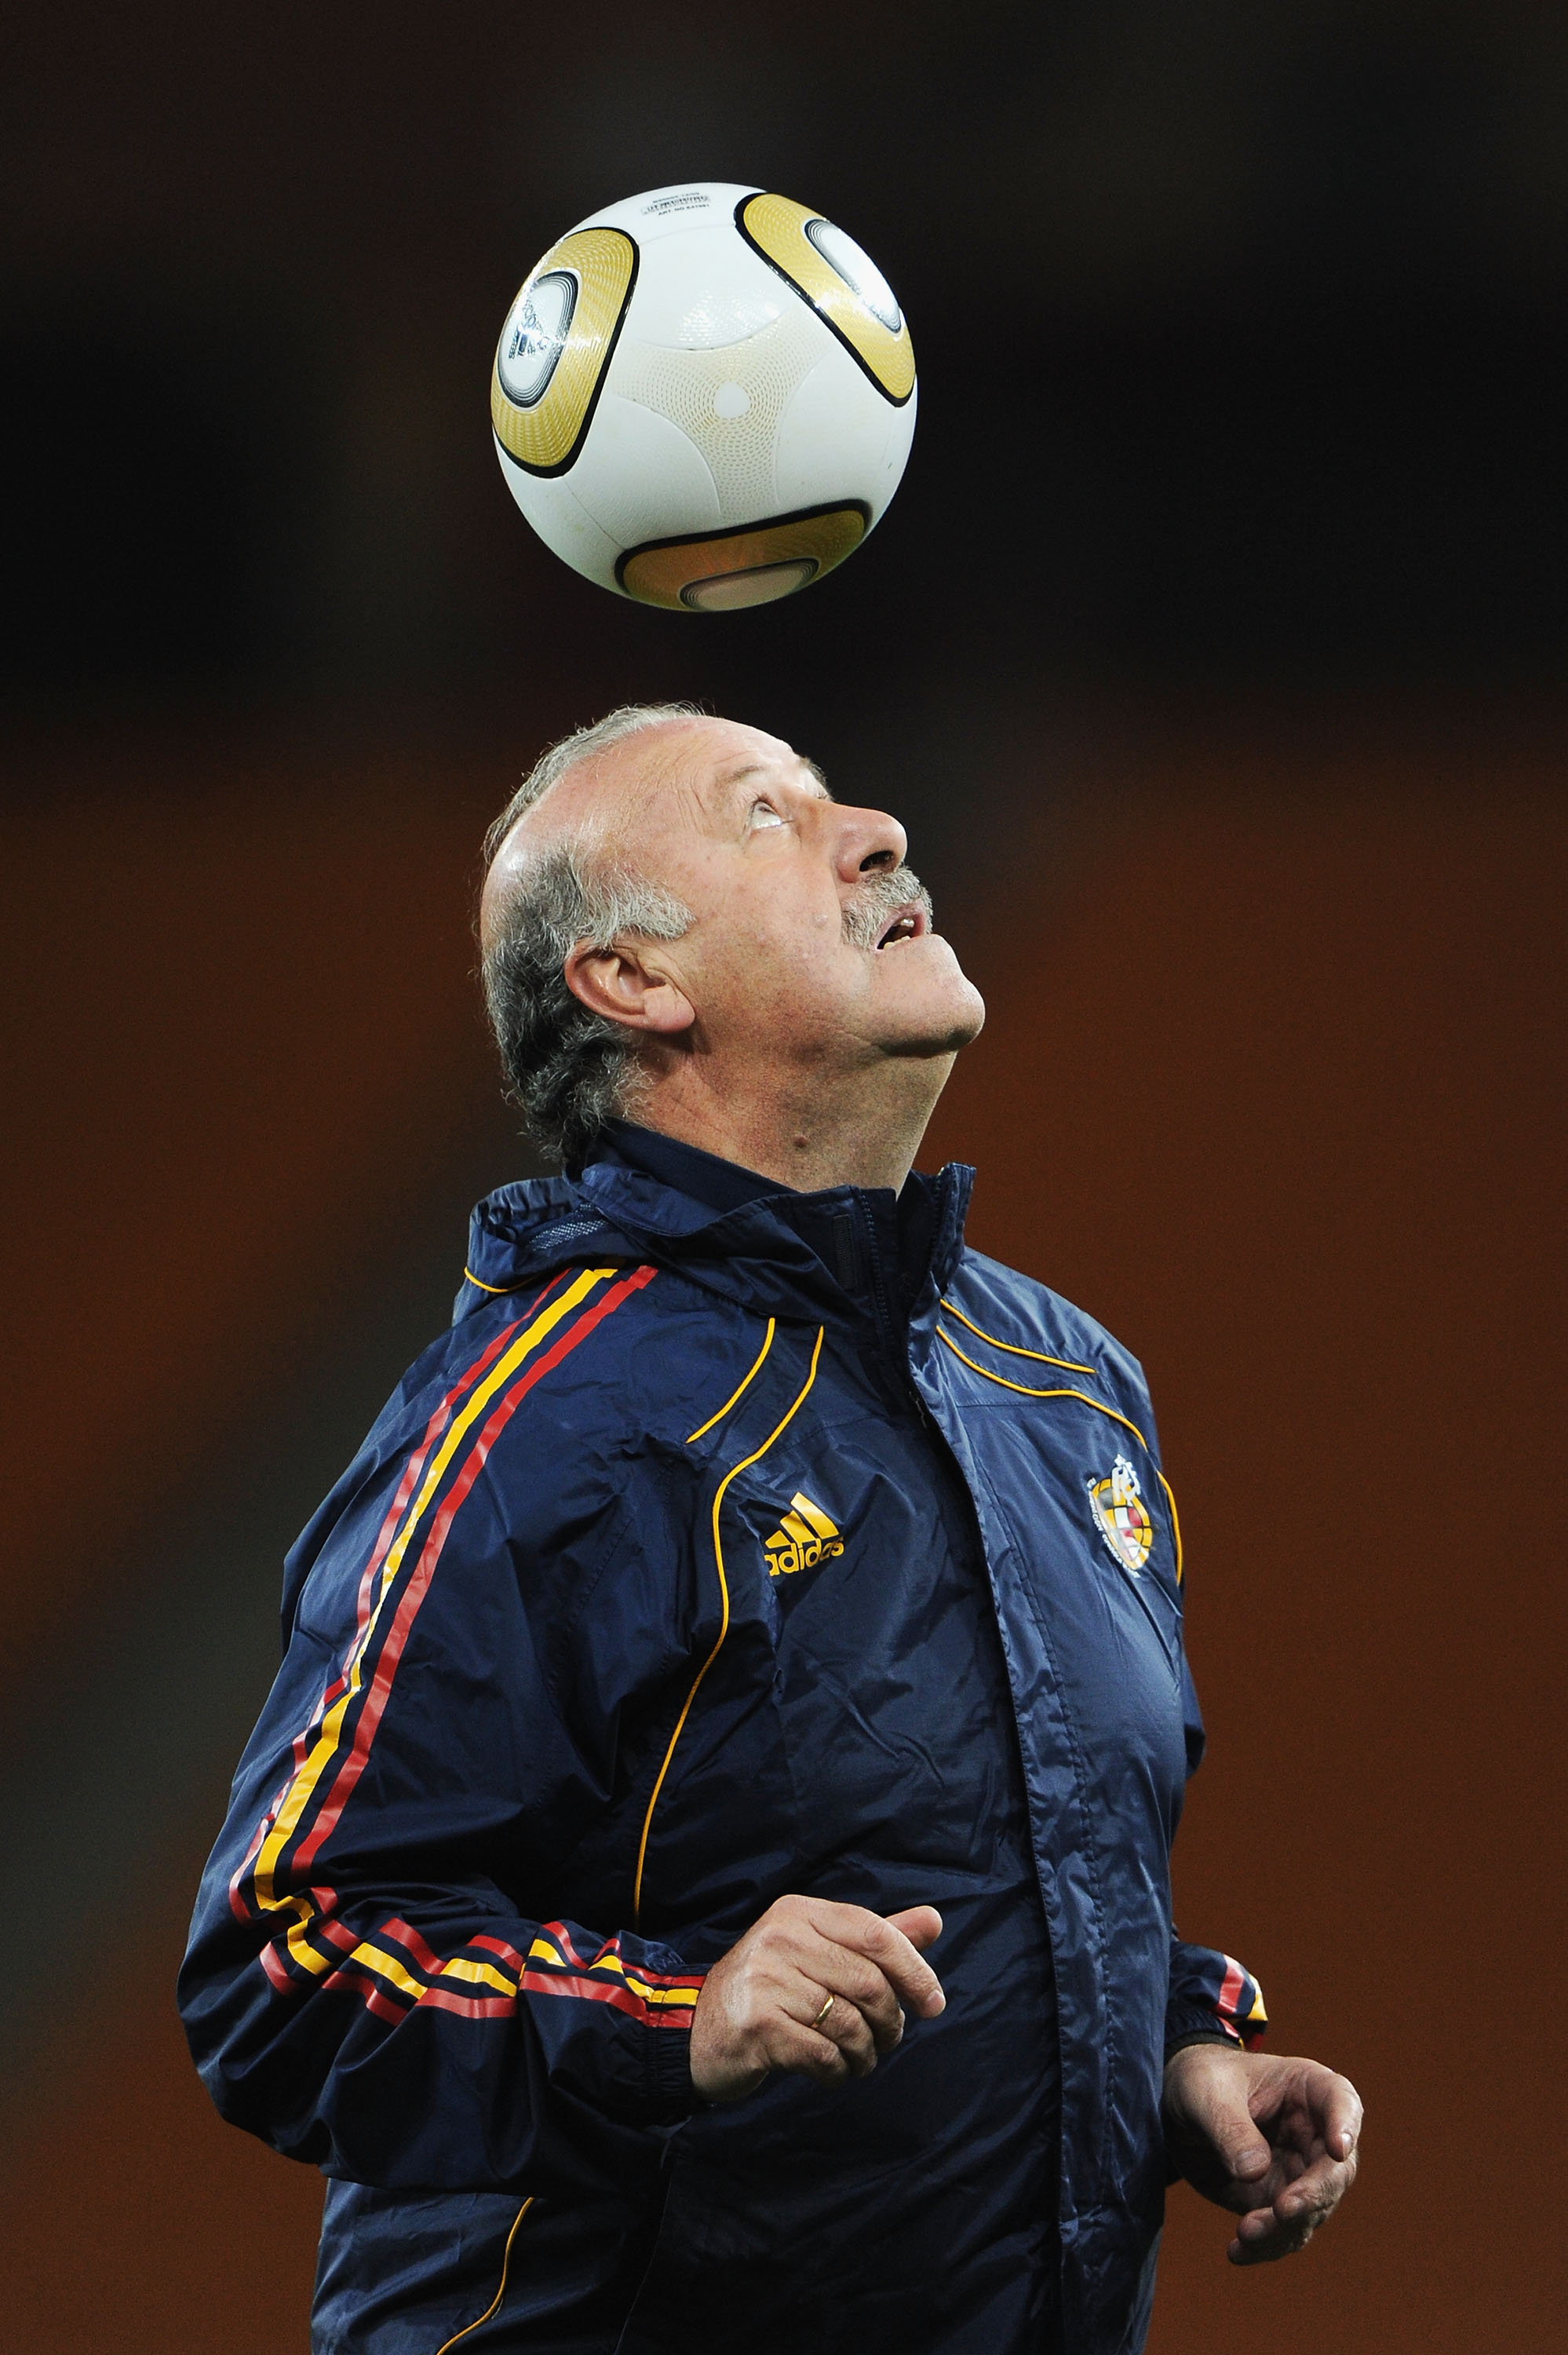 JOHANNESBURG, SOUTH AFRICA - JULY 10:  Vicente del Bosque Head Coach of Spain controls a ball with his head during a Spain training session, ahead of the 2010 FIFA World Cup Final, at Soccer City Stadium on July 10, 2010 in Johannesburg, South Africa.  (P